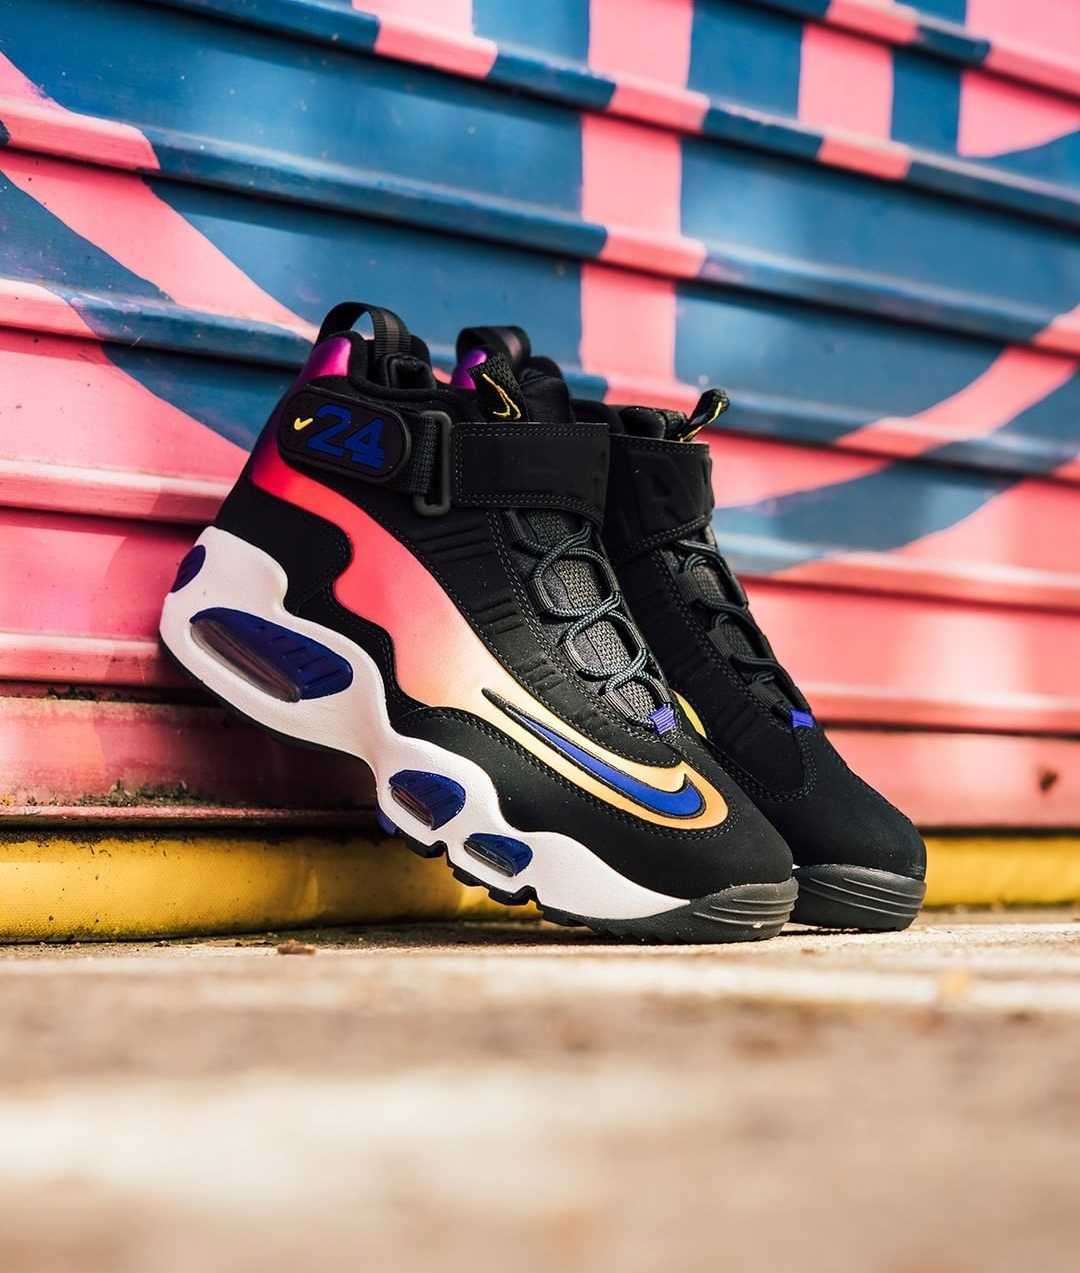 solefed on X: Nike Air Griffey Max 1 'Los Angeles' Champs https